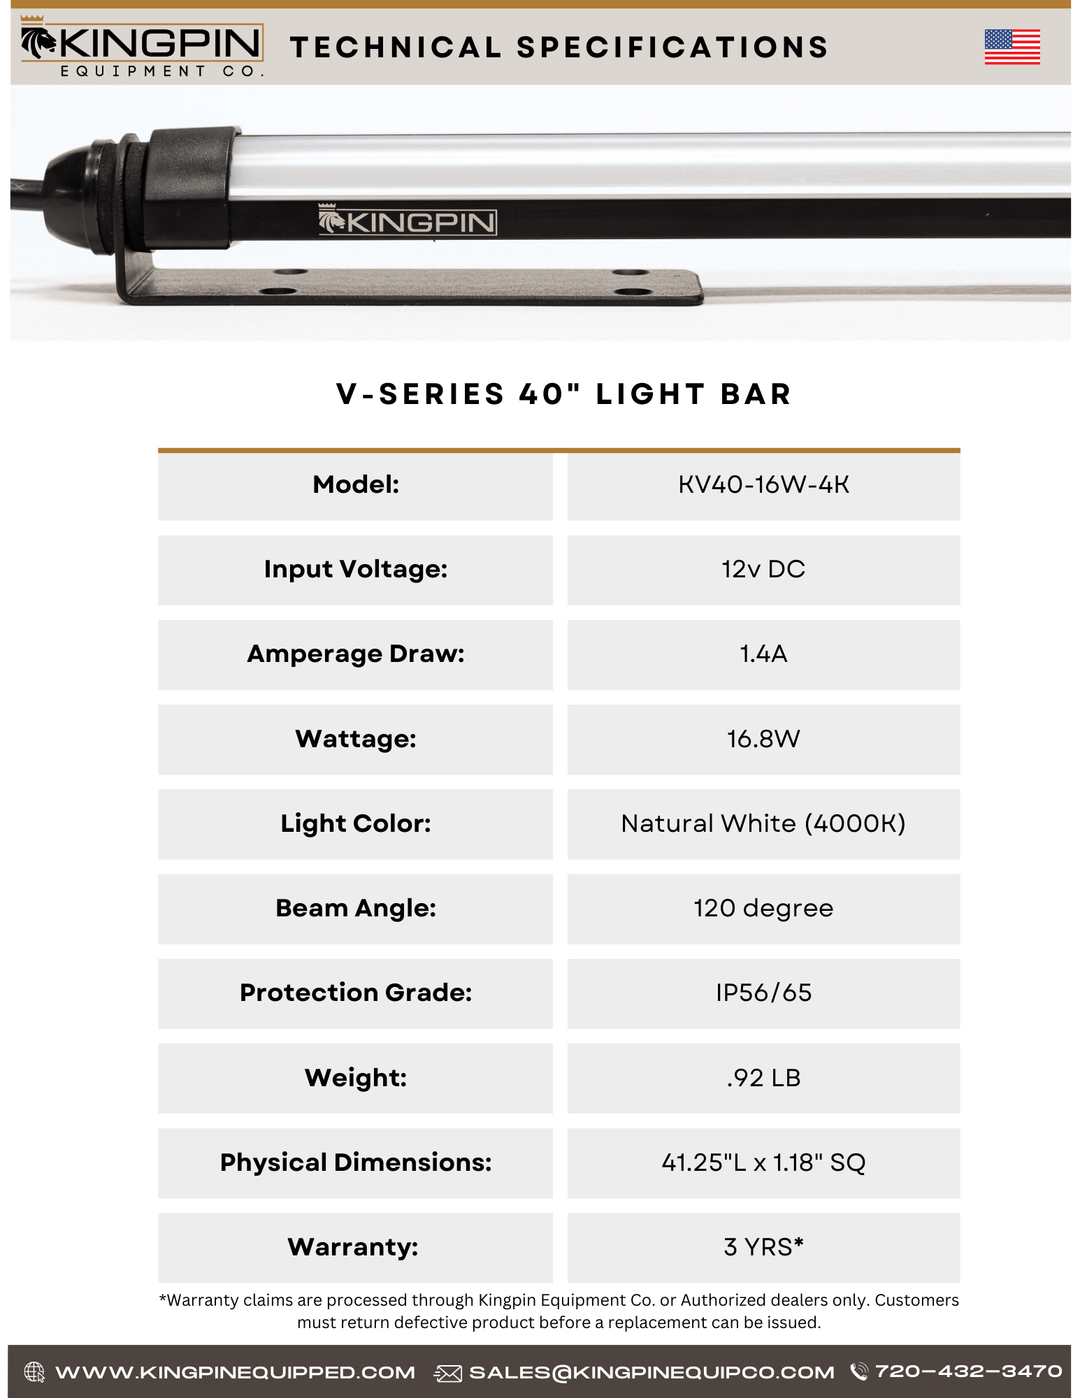 Technical charts showing specifications for Kingpin v-Series 40" light bar. 